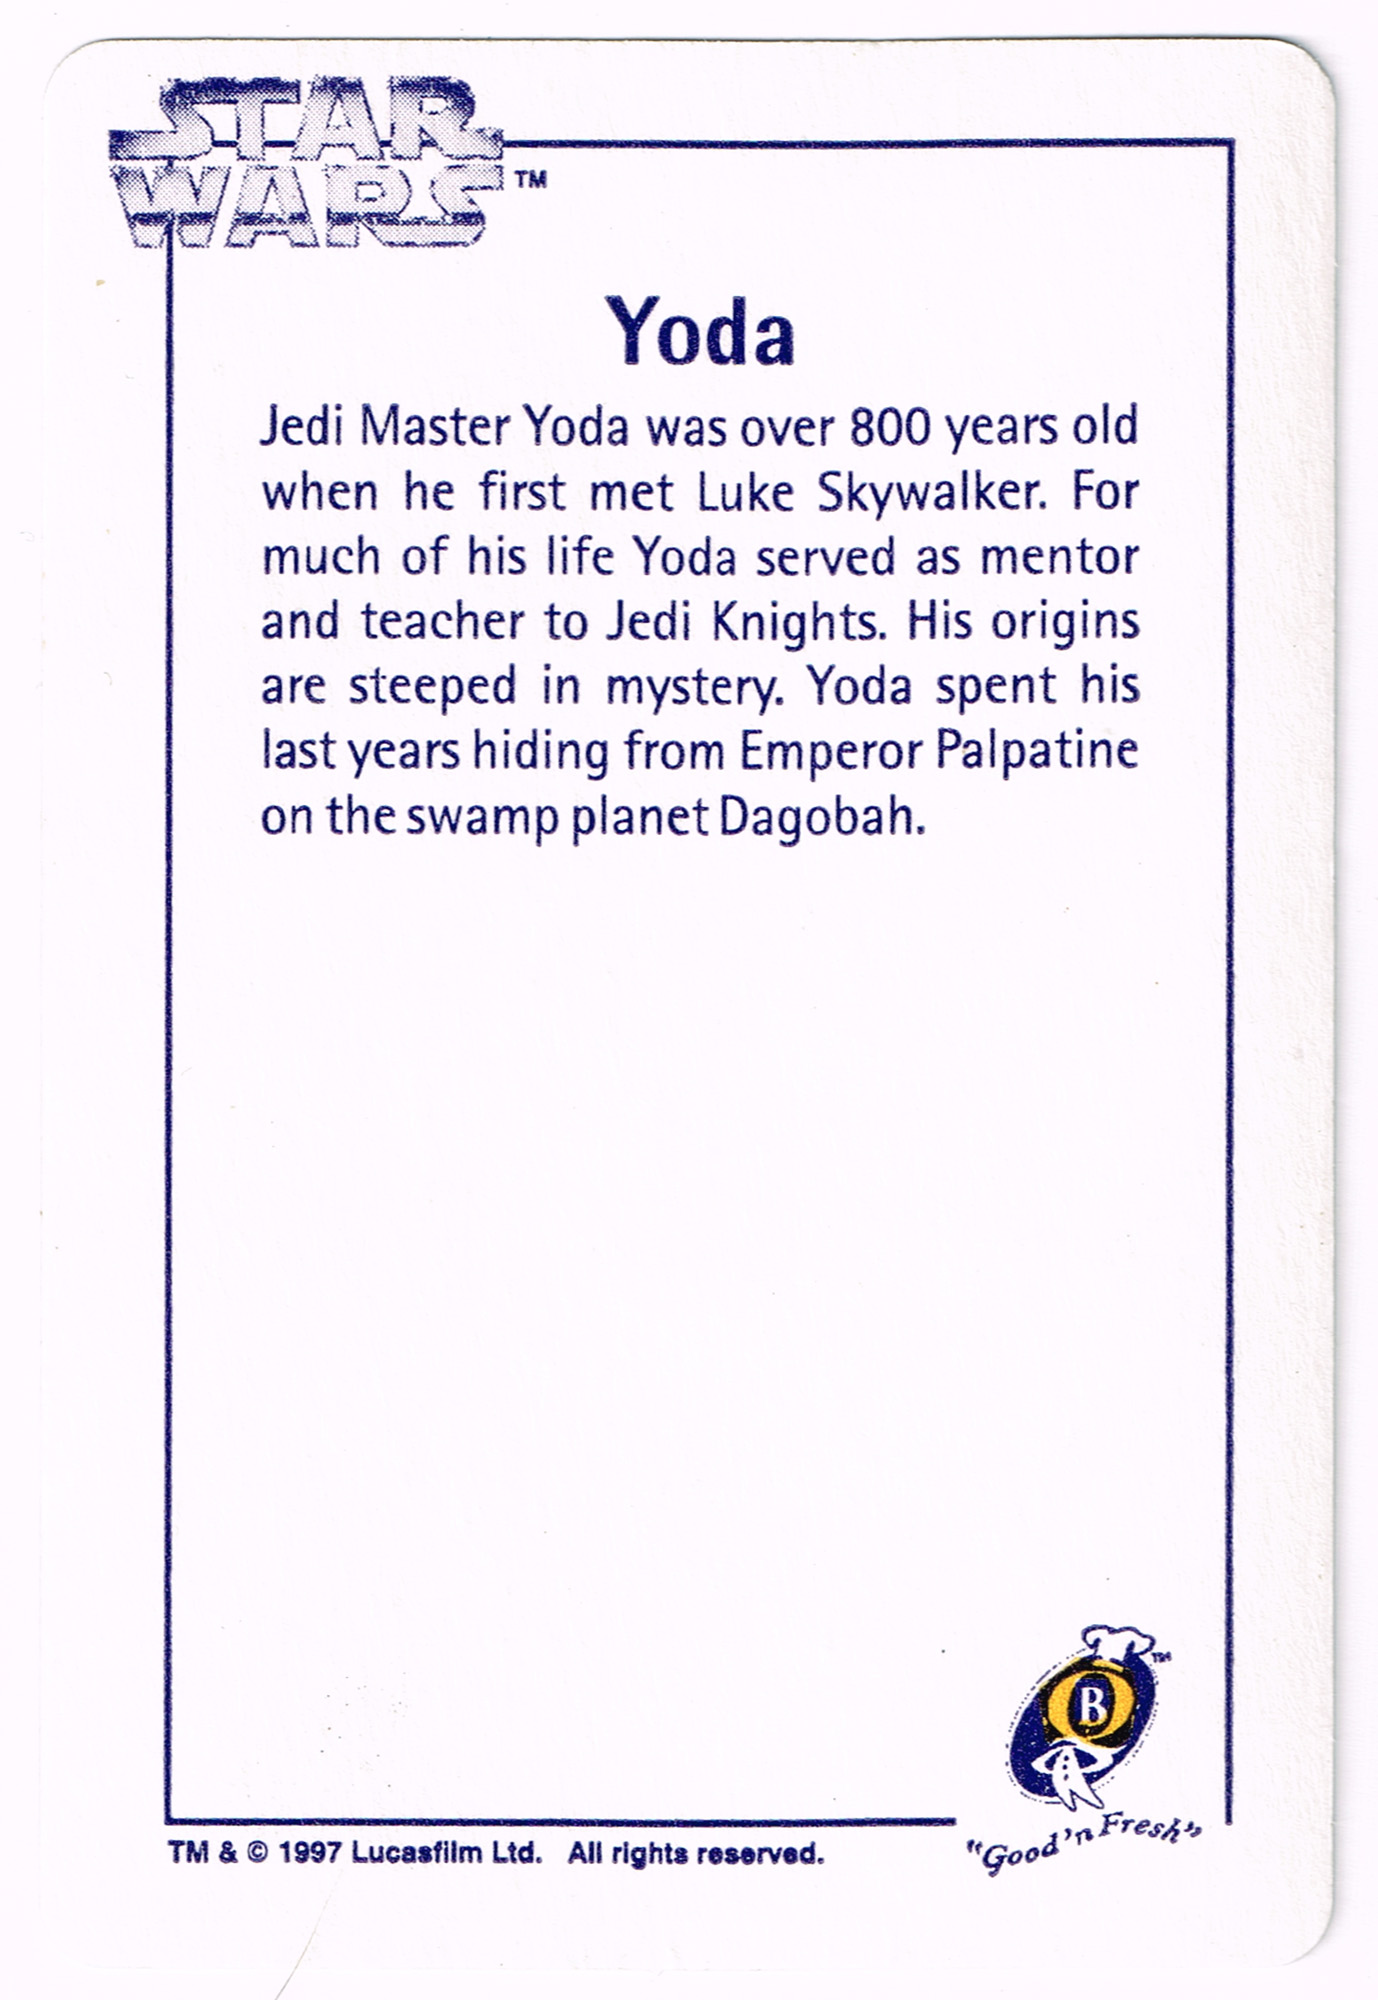 Quality Bakers Card 9 - Yoda